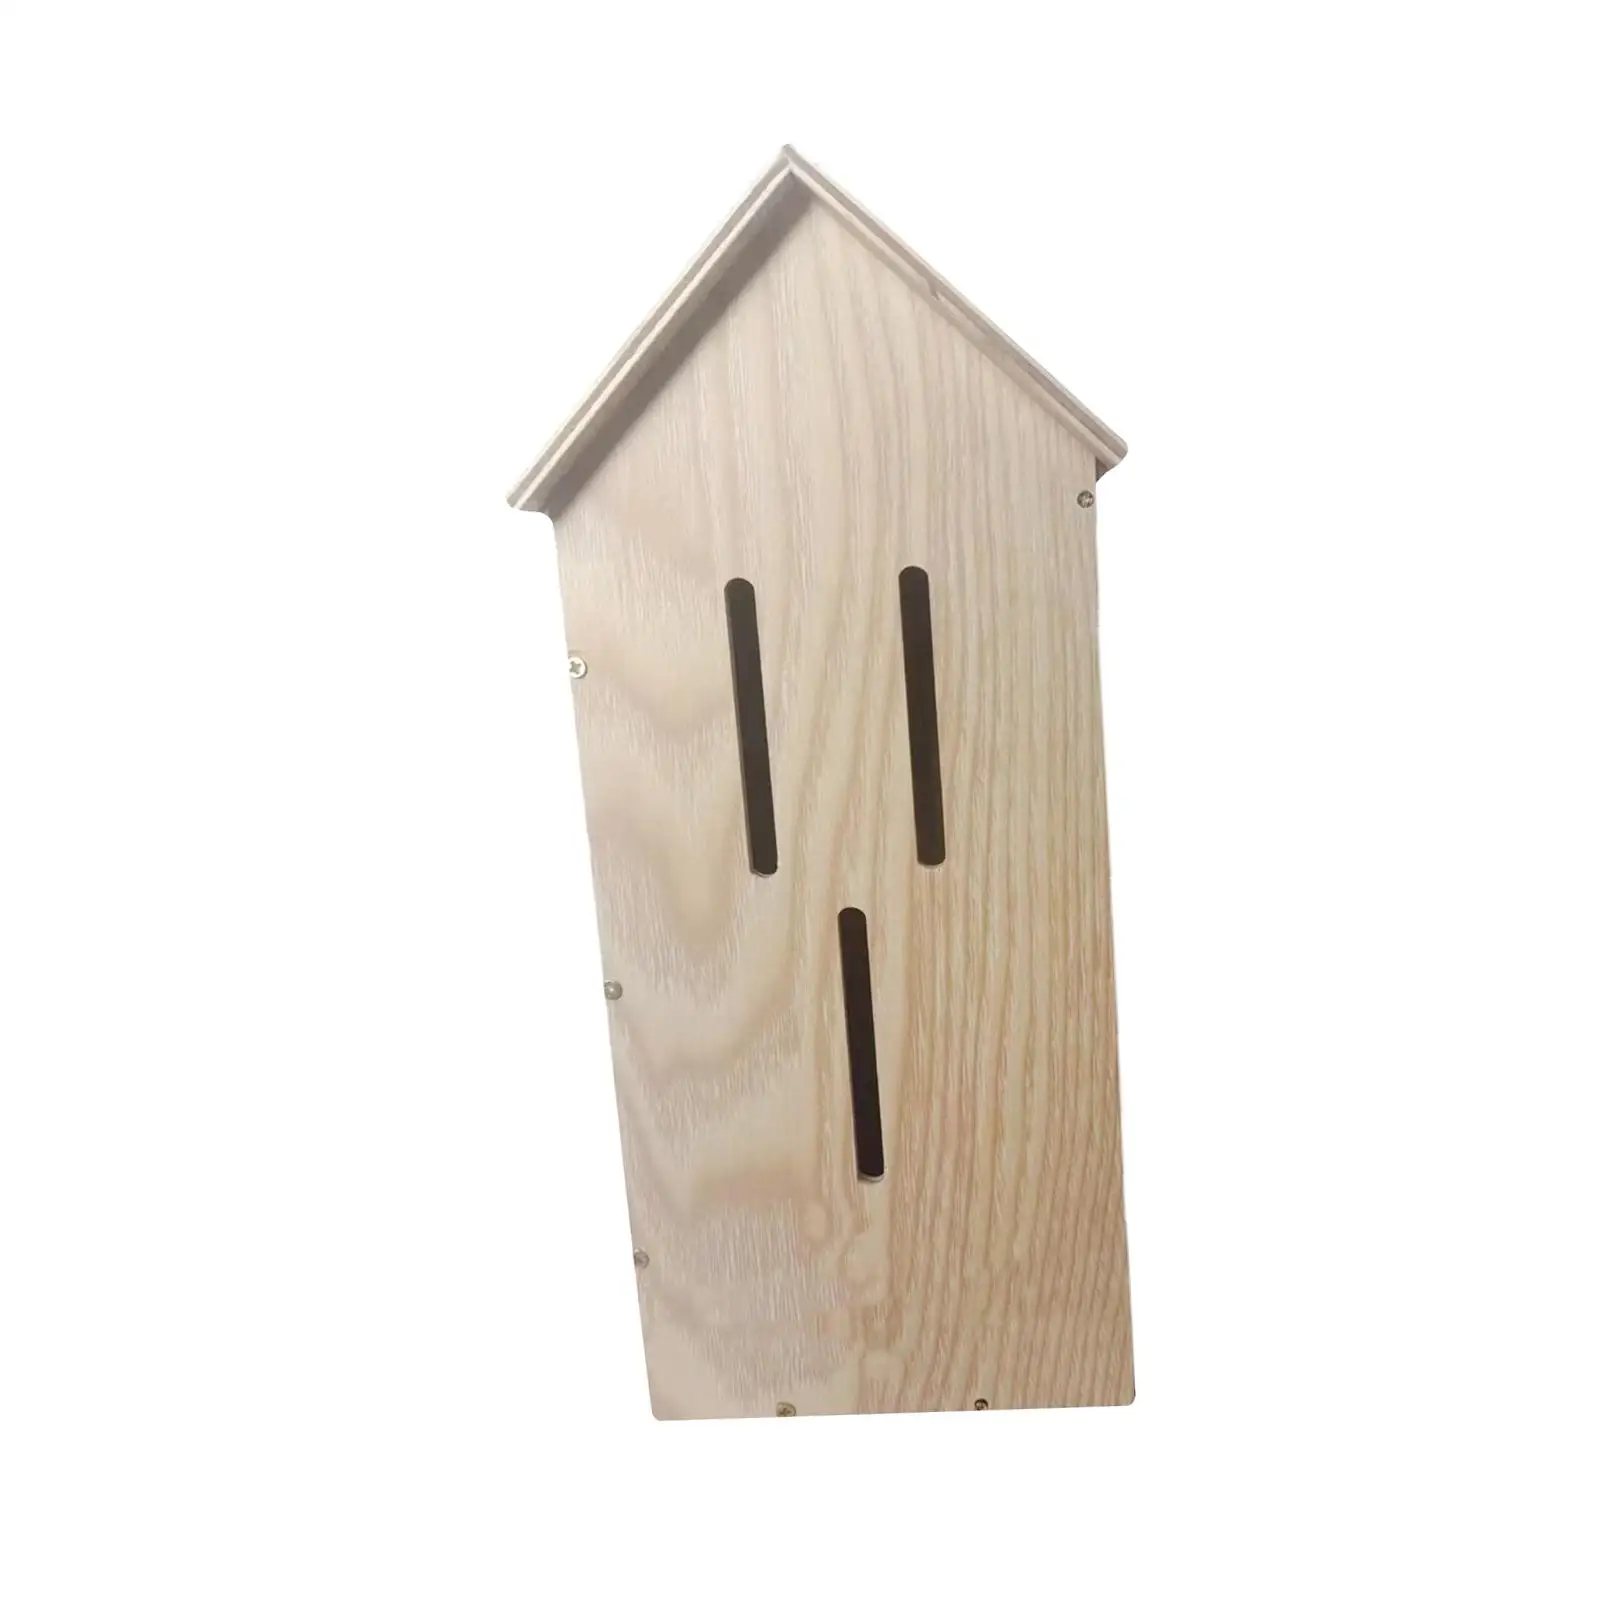 Butterfly Habitat Supplies Tree Trunk Protector Guard Bird house Kit House Wooden Butterfly House for Hotel Room